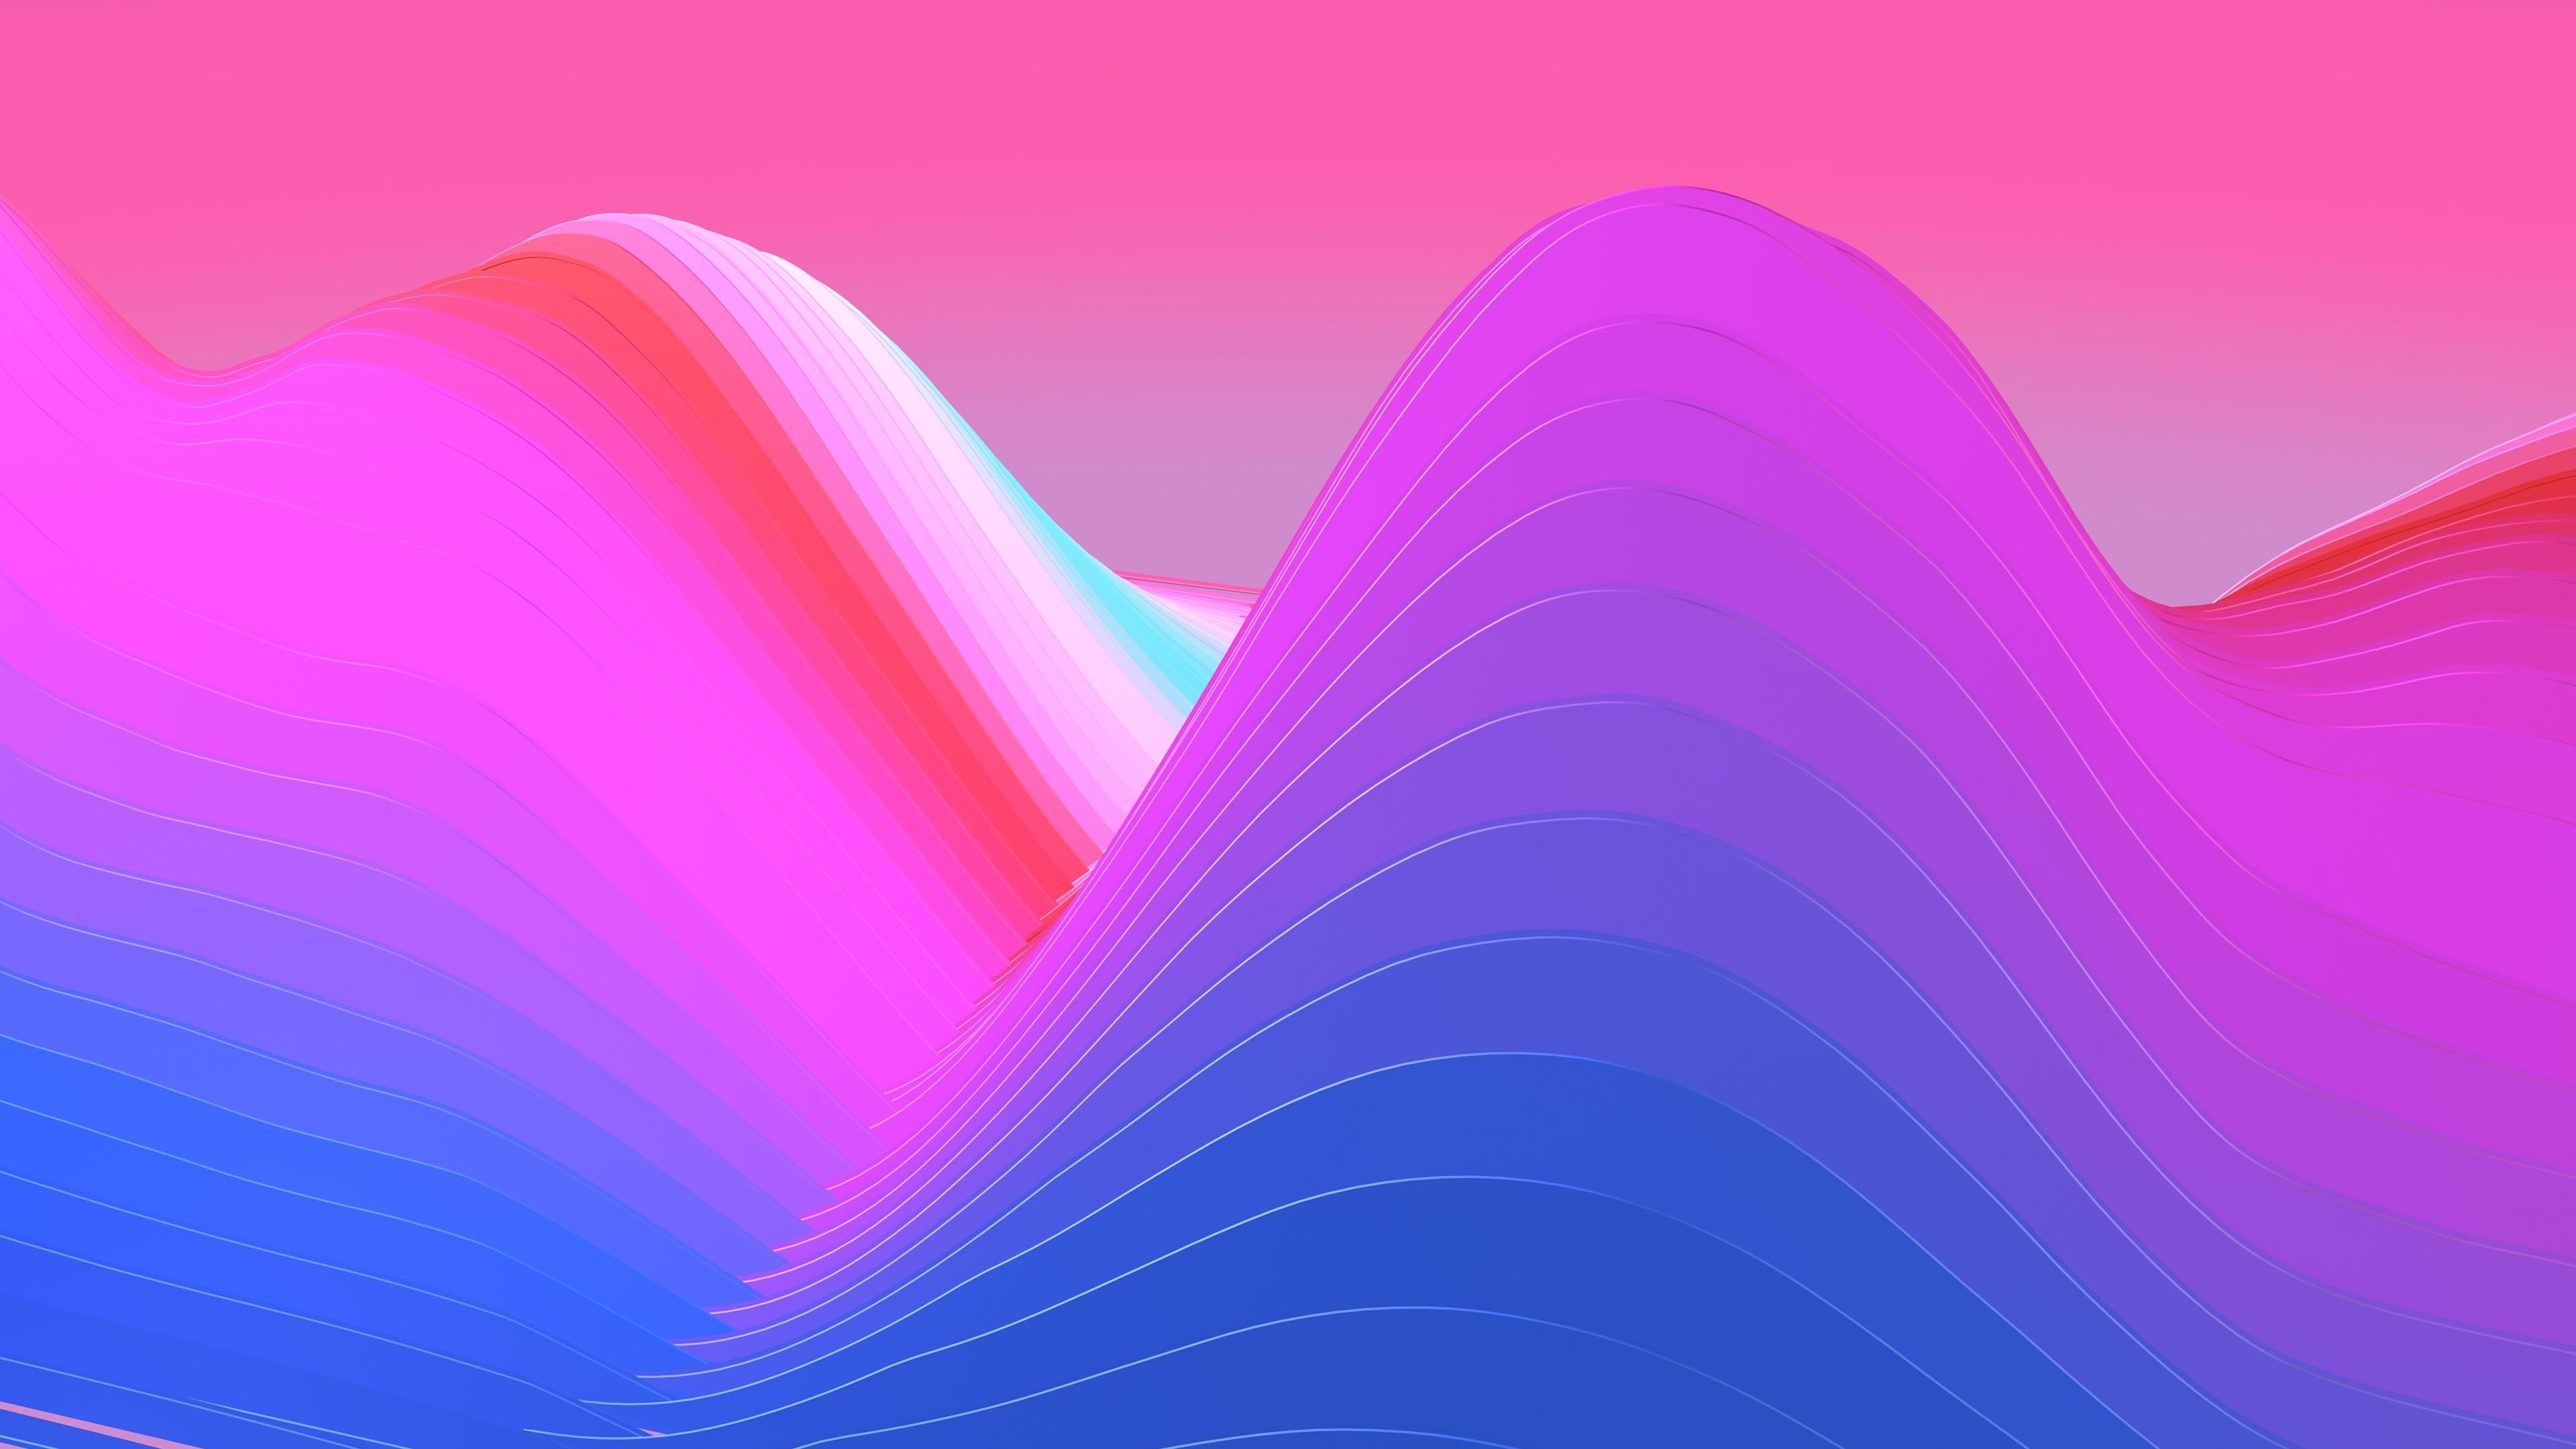 Download 3840x2160 Neon Waves, Pink And Purple, Mountain Wallpaper